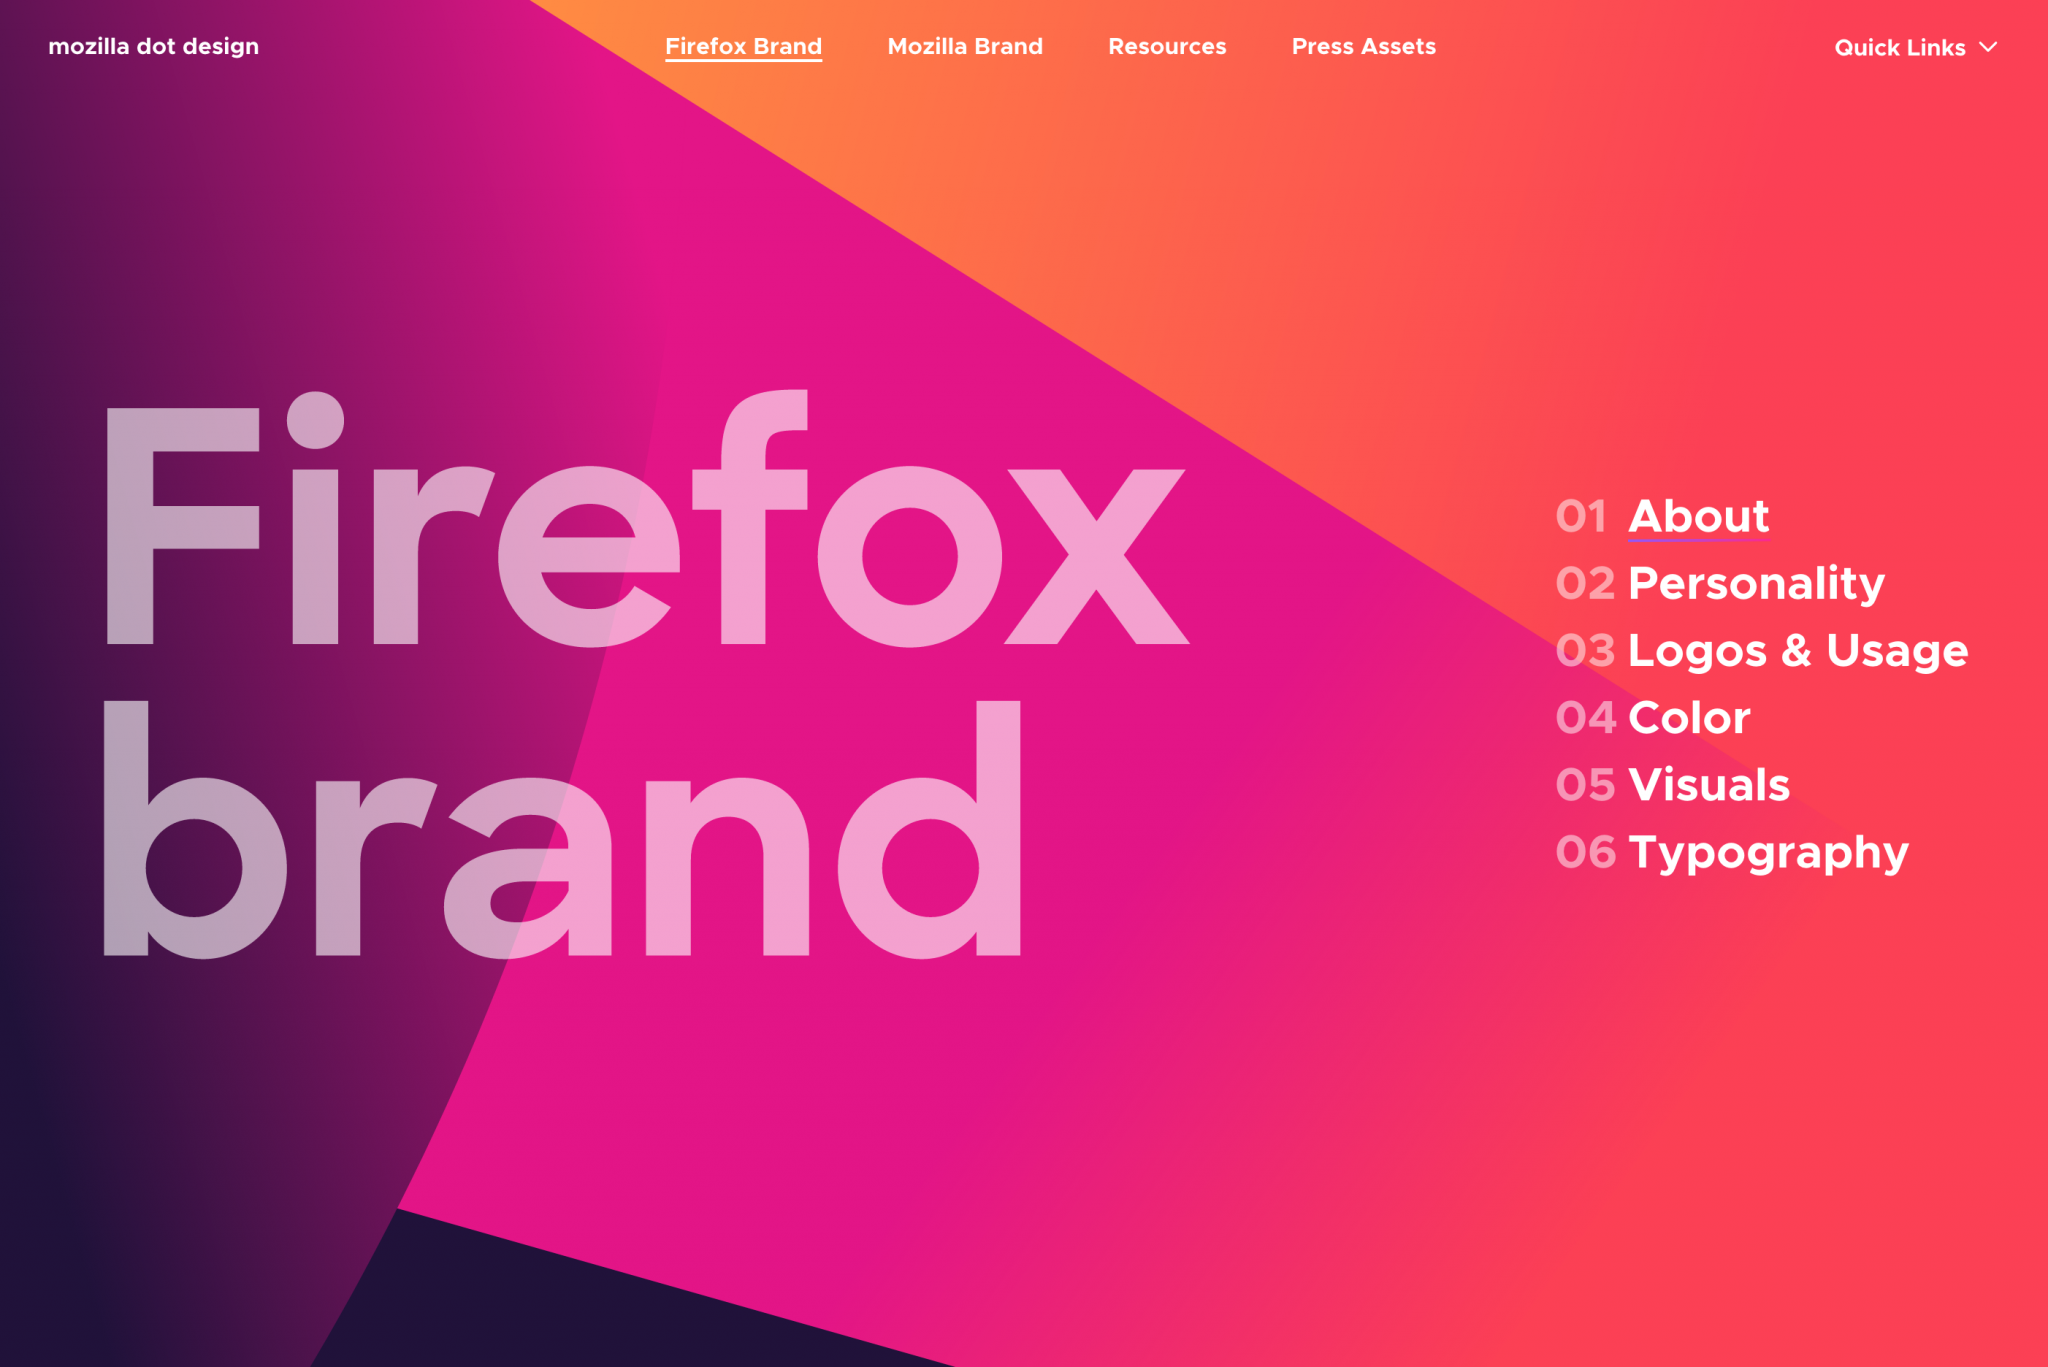 Firefox brand style guide on Mozilla's website